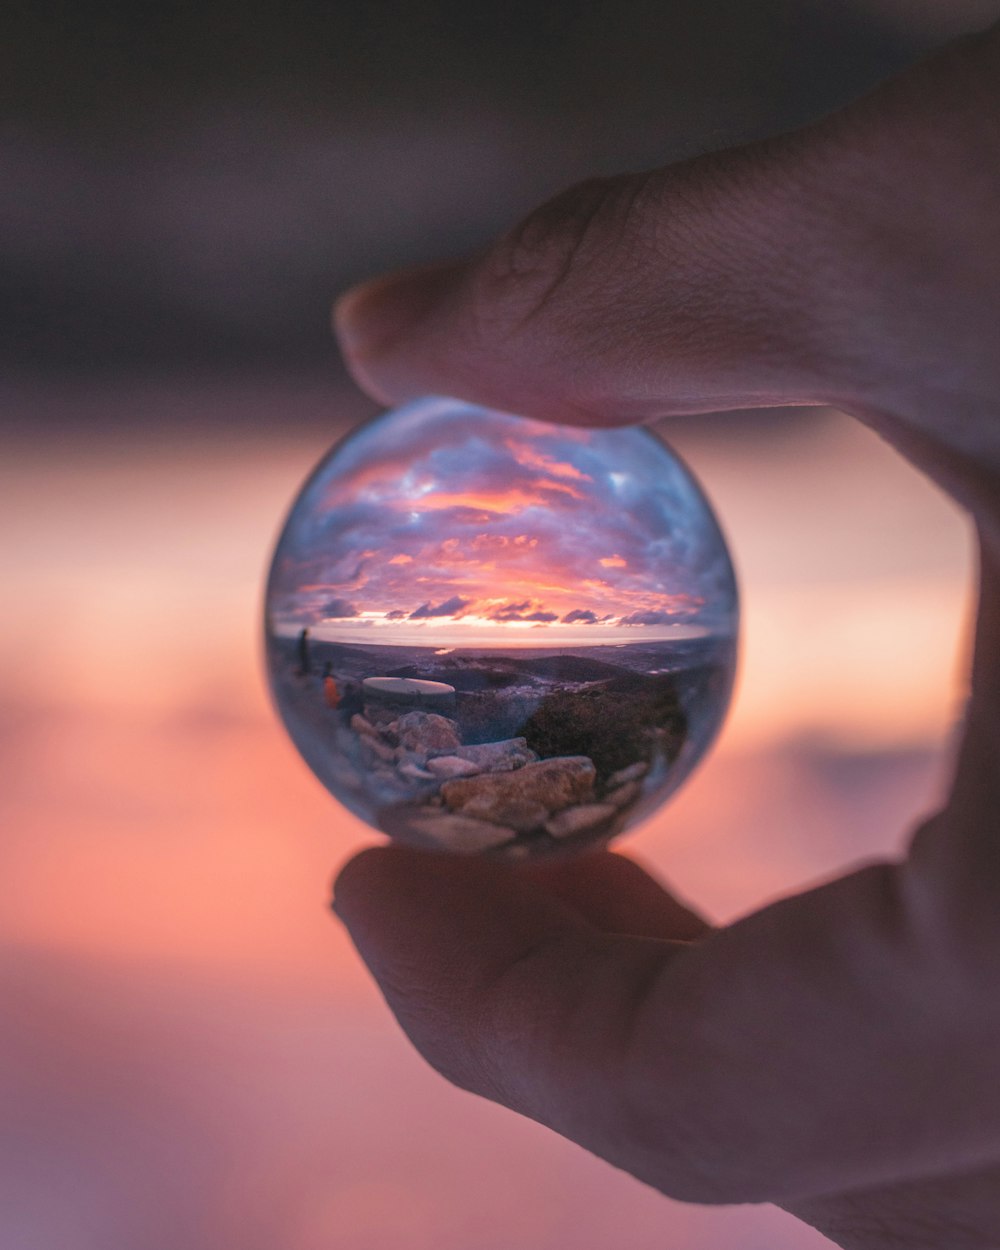 person holding clear glass ball